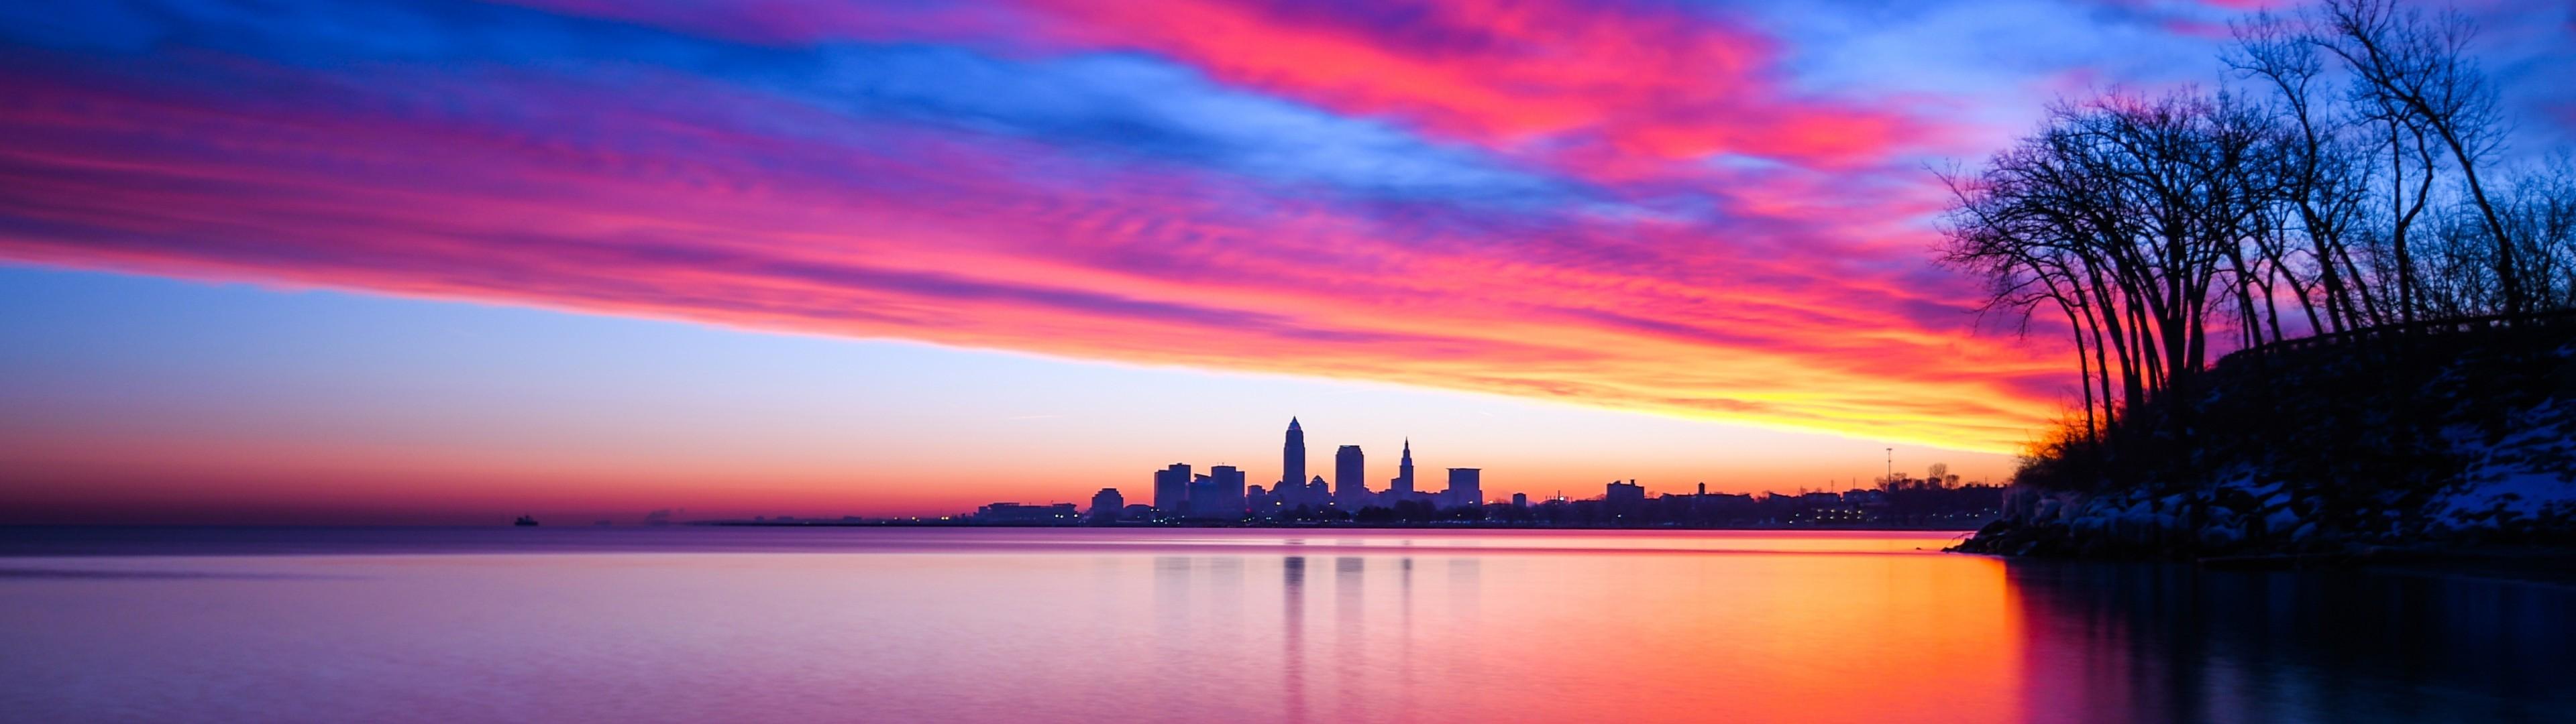 Download 3840x1080 United States, Cleveland, Ohio, Sunset, Clouds